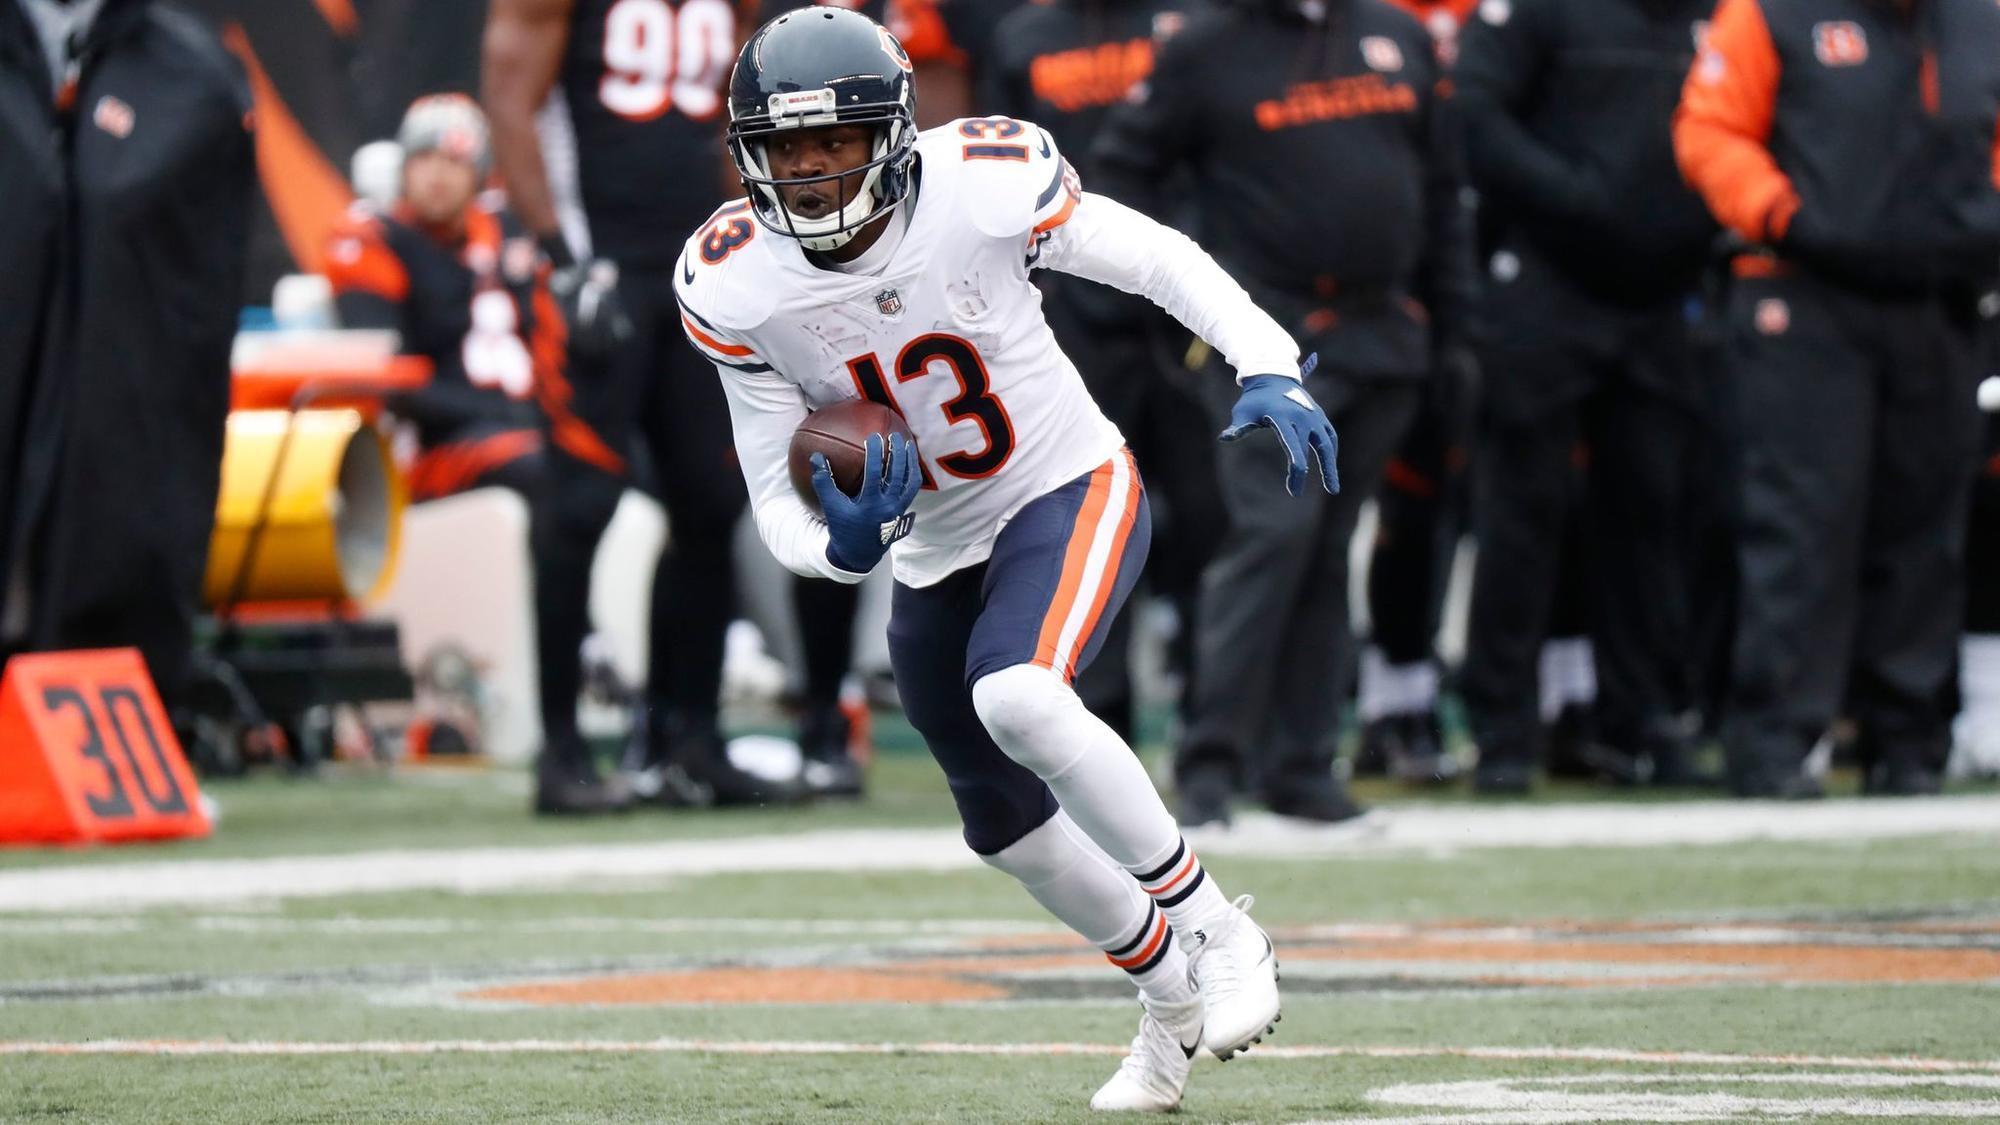 ct-spt-bears-new-receivers-kendall-wrigh